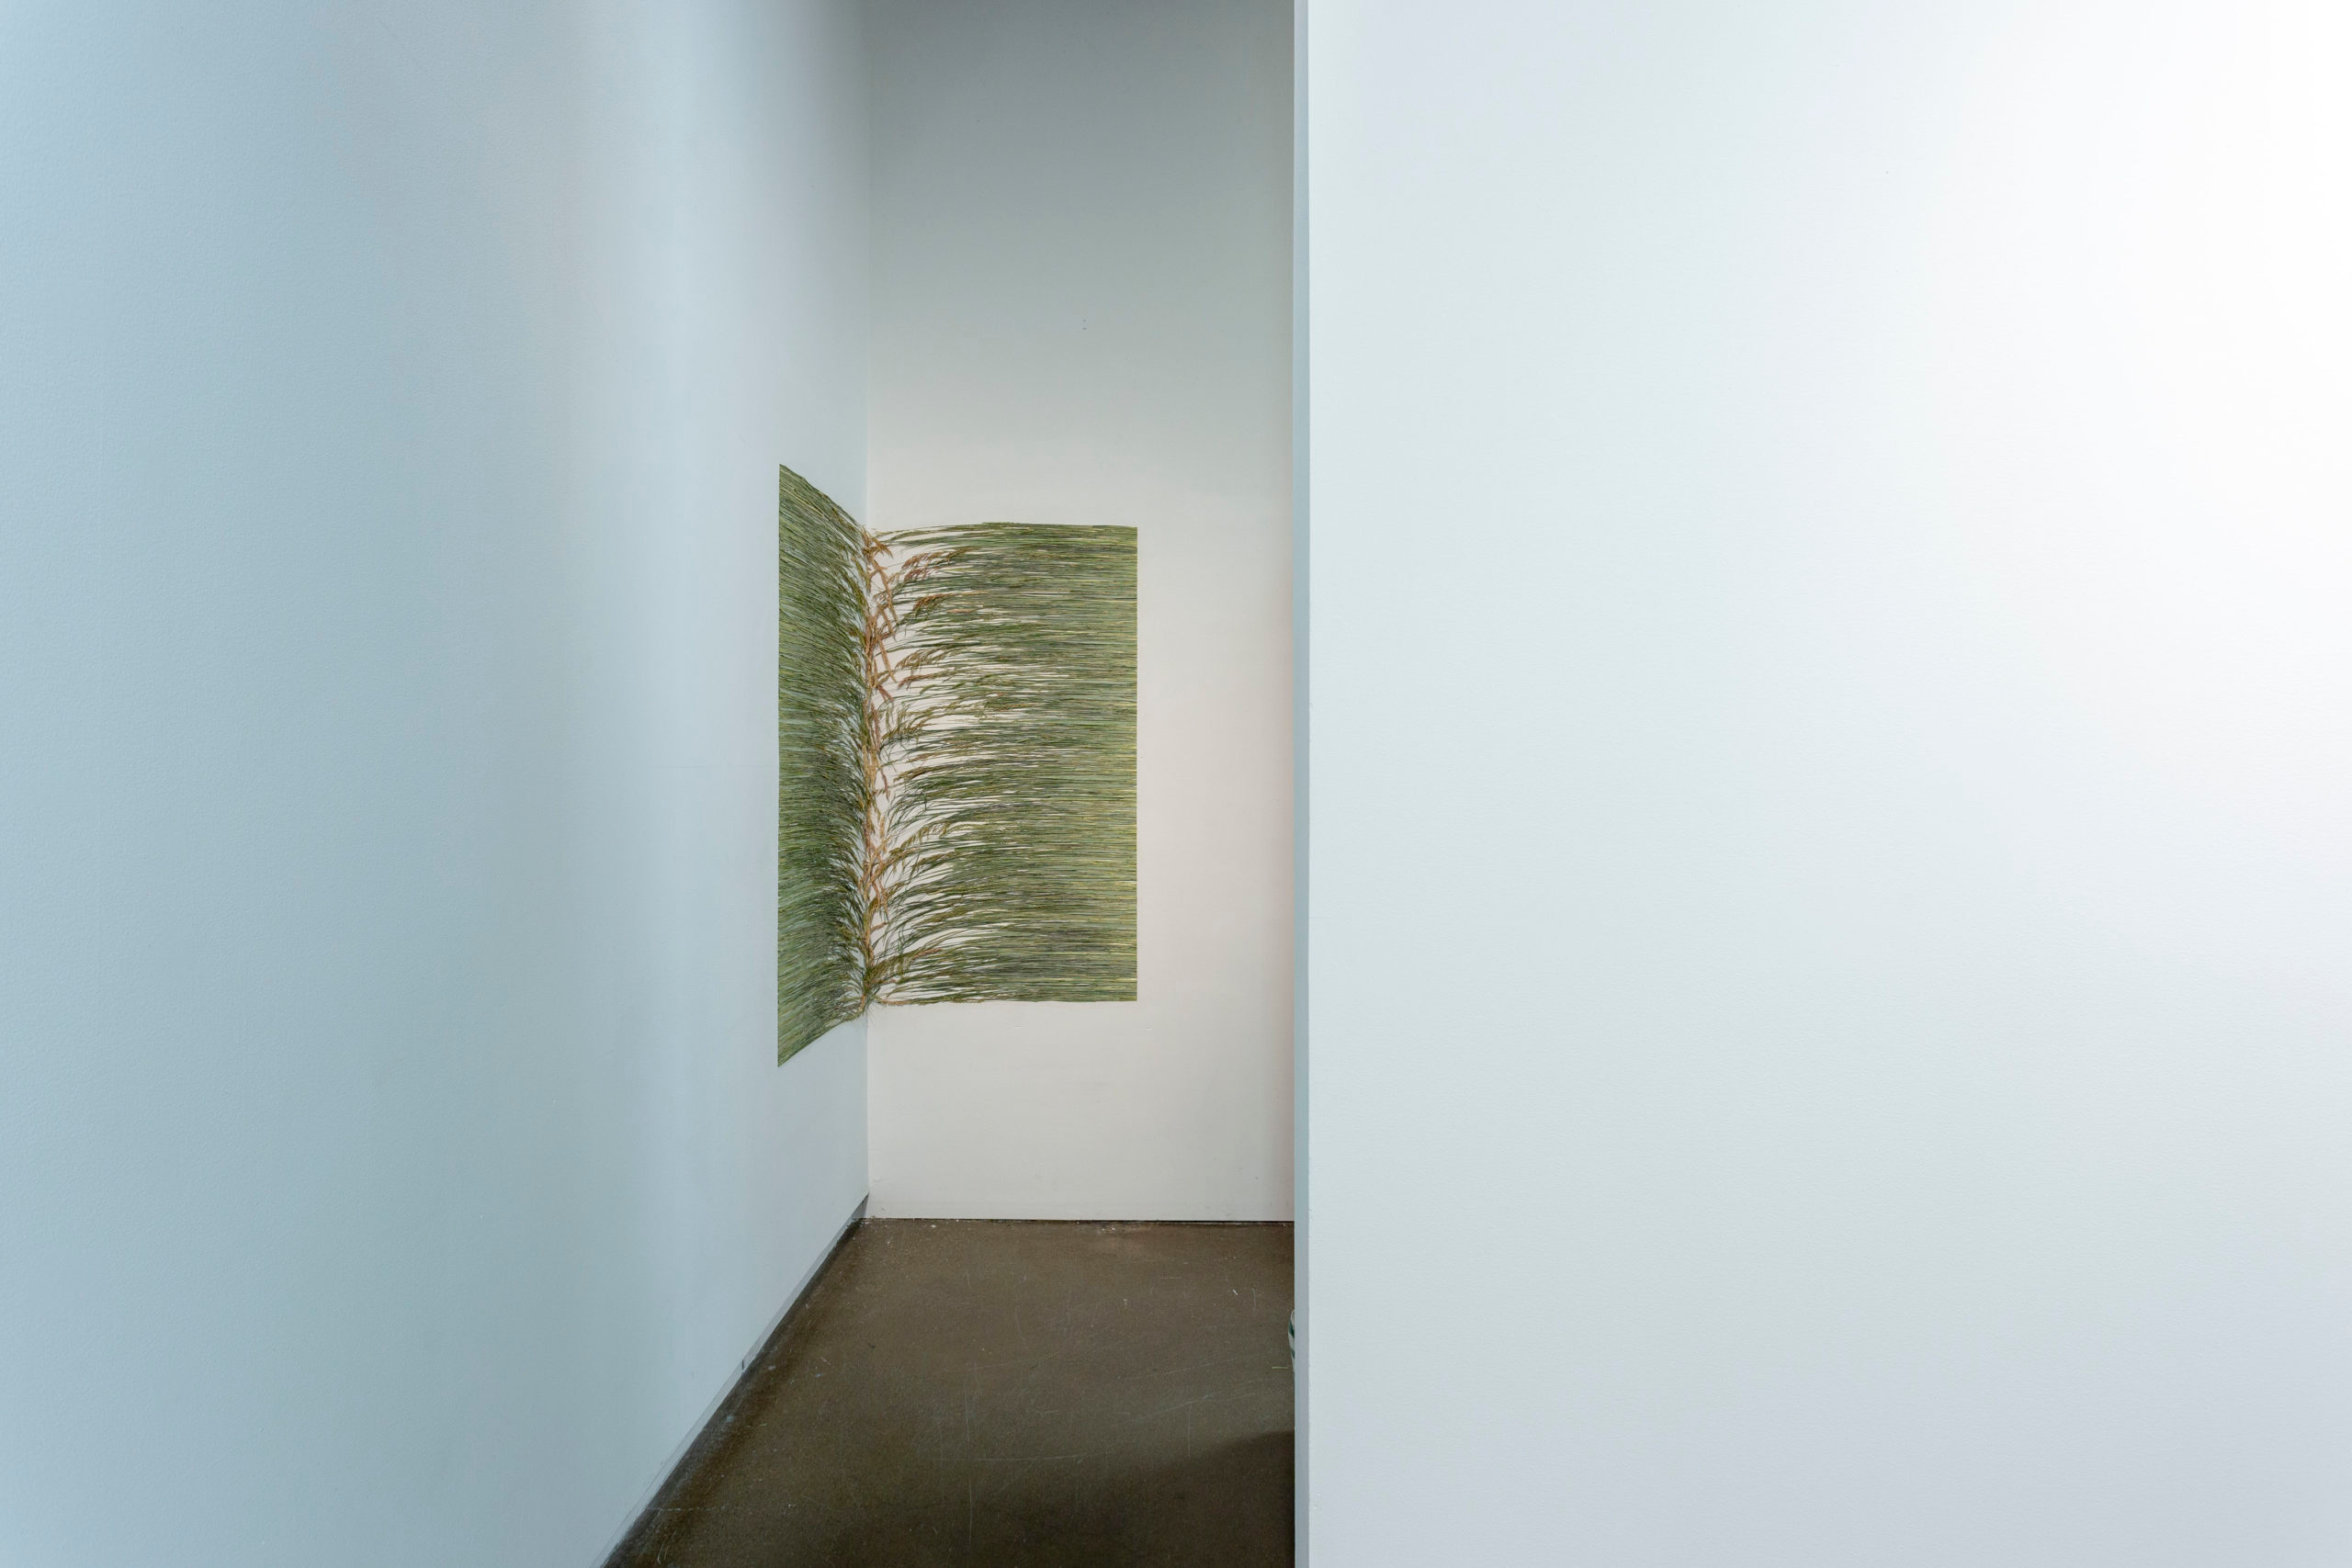     Group exhibition, a soft landing, installation view, Gallery TPW, 2022. Courtesy of the artists and Gallery TPW

